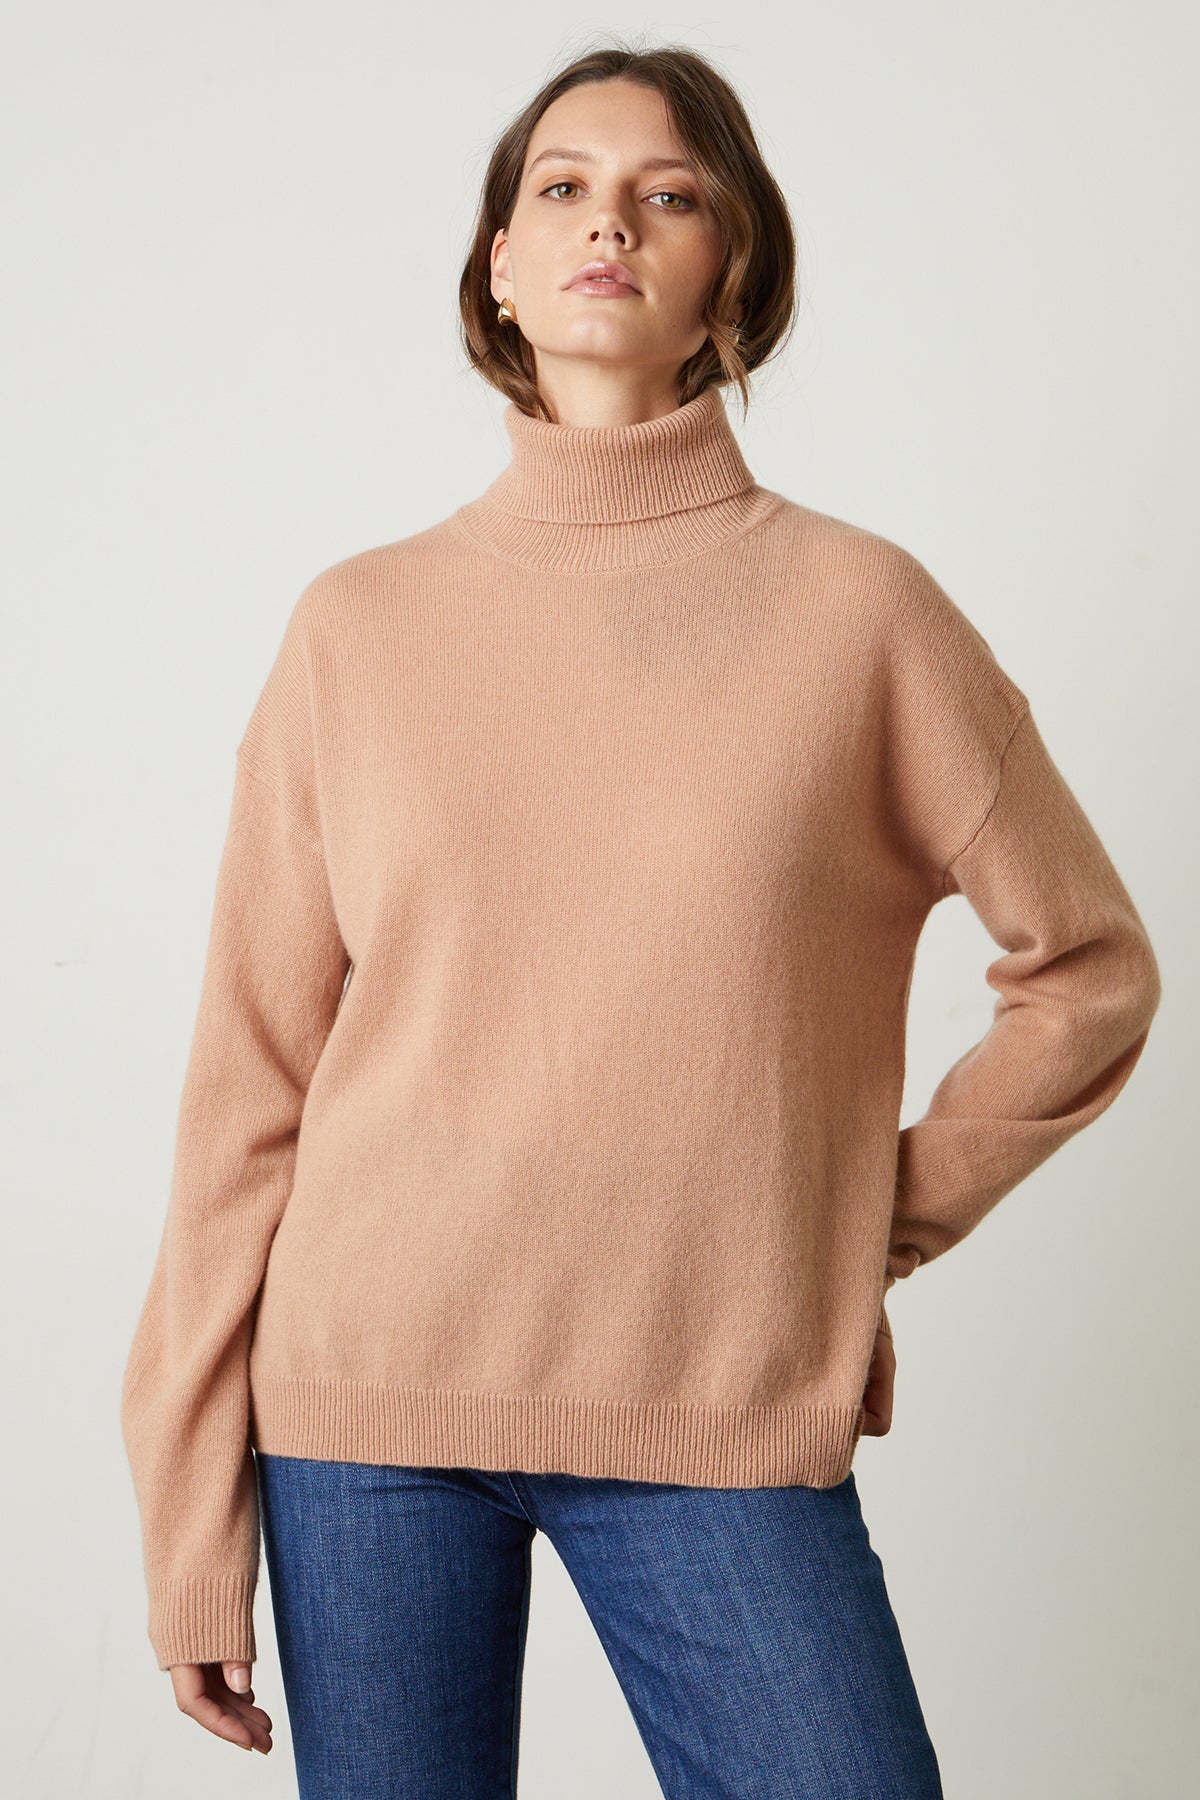   Ellie Sweater in Maple Front 